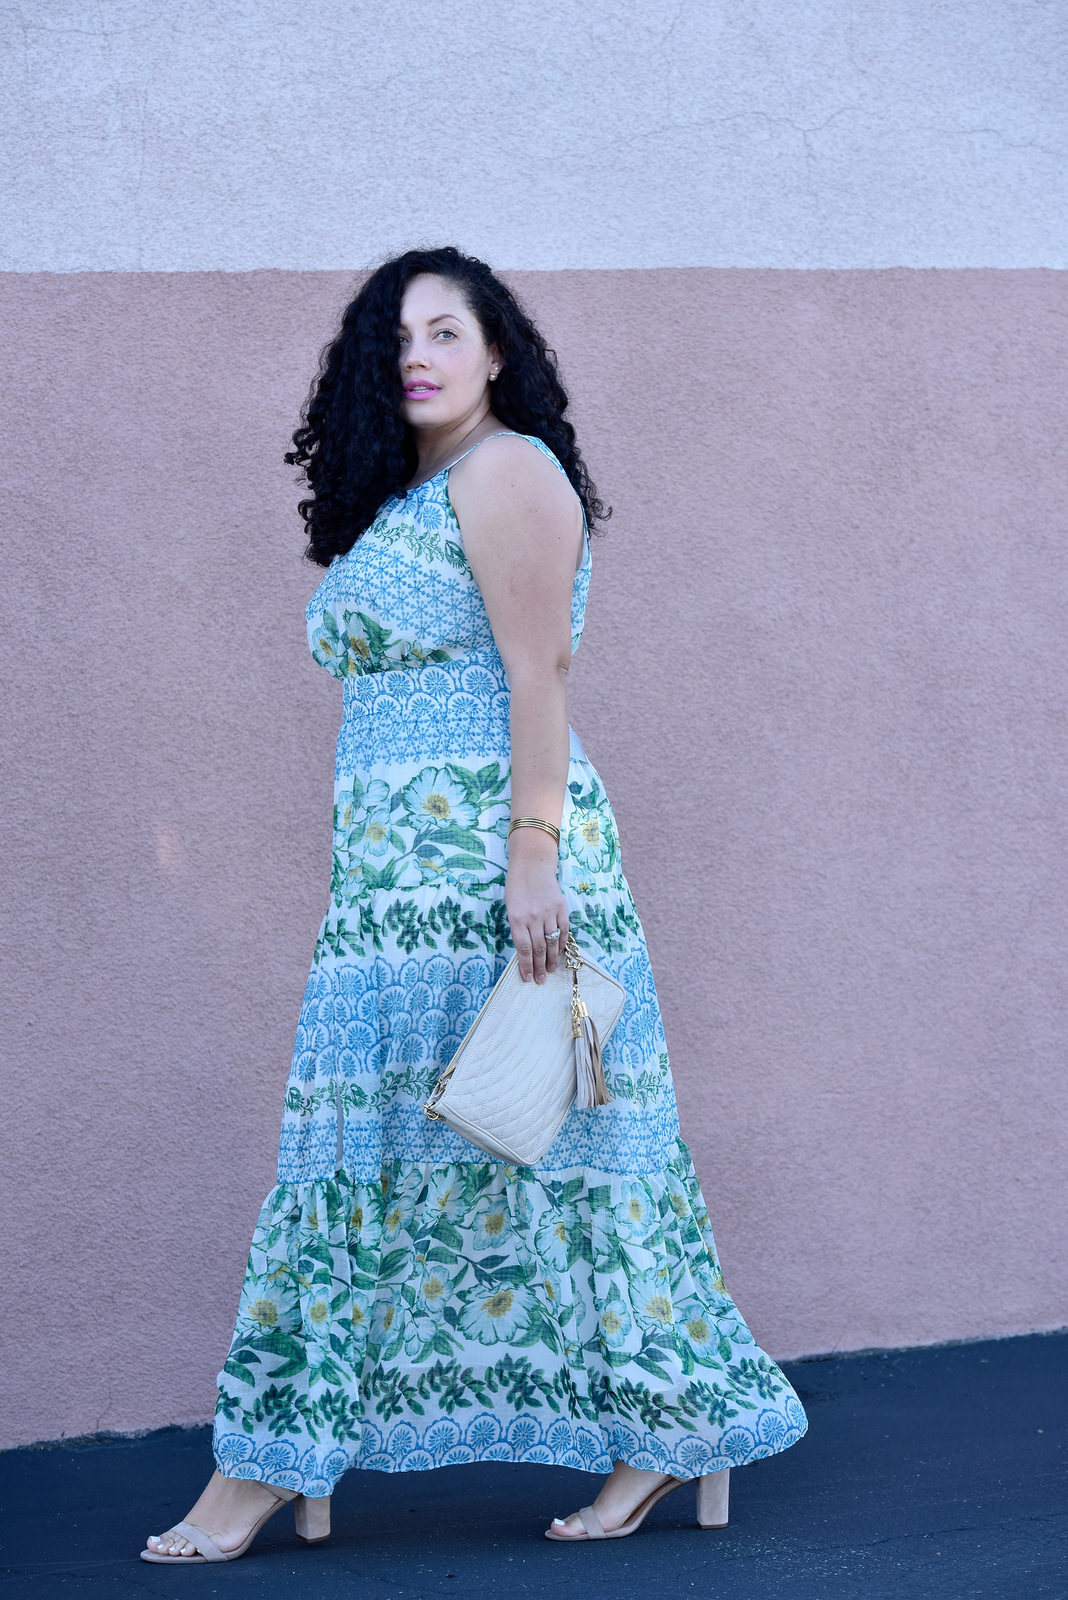 Plus size Maxi Dress by Eliza J, Bag from BCBG, Shoes by Nordstorm, and Love Lorn Lipstick by Mac via @girlwithcurves